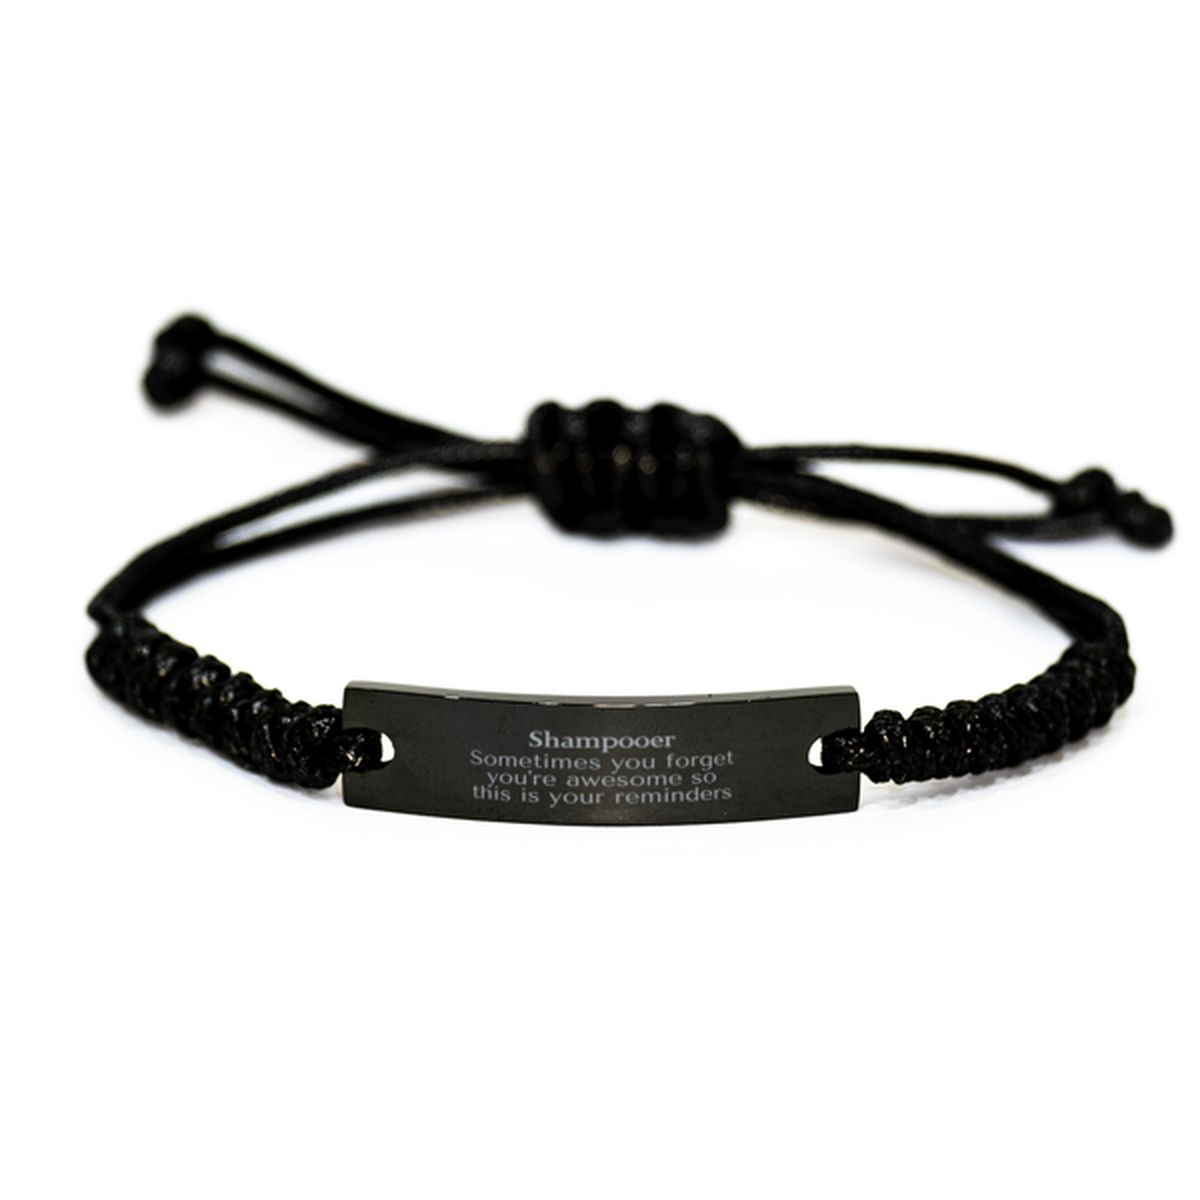 Sentimental Shampooer Black Rope Bracelet, Shampooer Sometimes you forget you're awesome so this is your reminders, Graduation Christmas Birthday Gifts for Shampooer, Men, Women, Coworkers